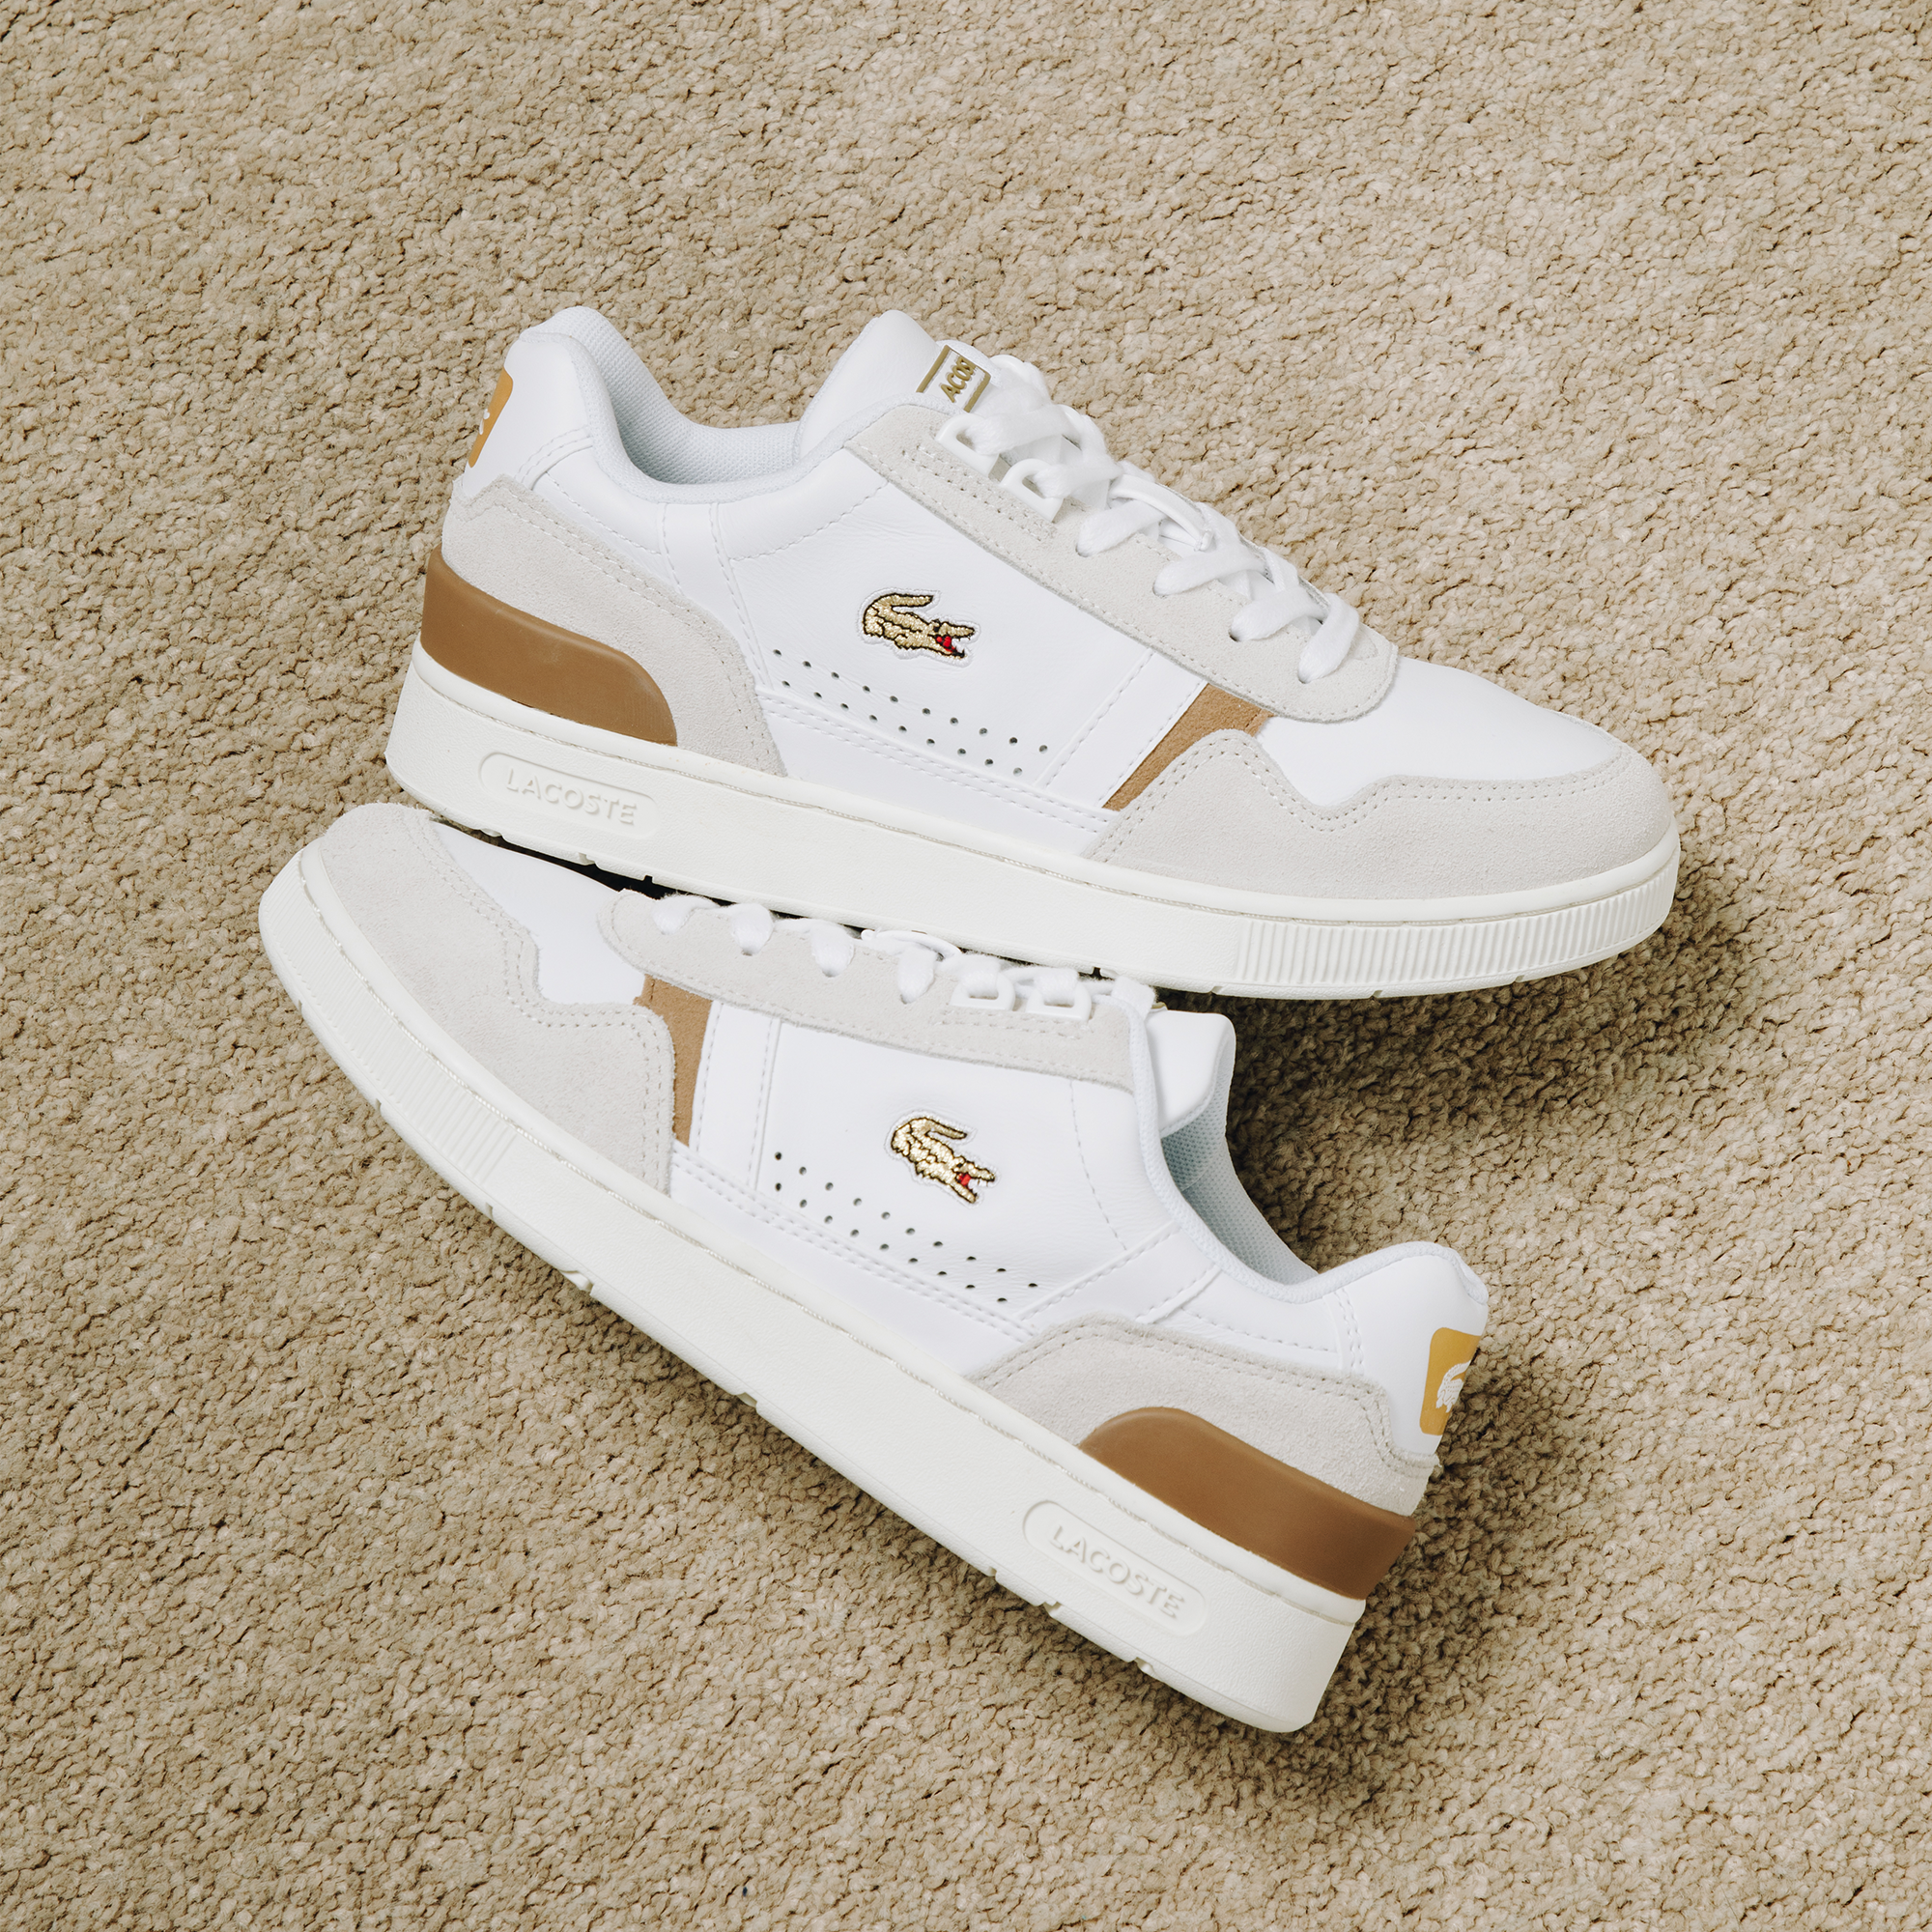 Jumping jack Hover Weinig LACOSTE T-CLIP BLANC/BEIGE/OR WHITE/BLACK - SNEAKERS WOMEN | Courir.com